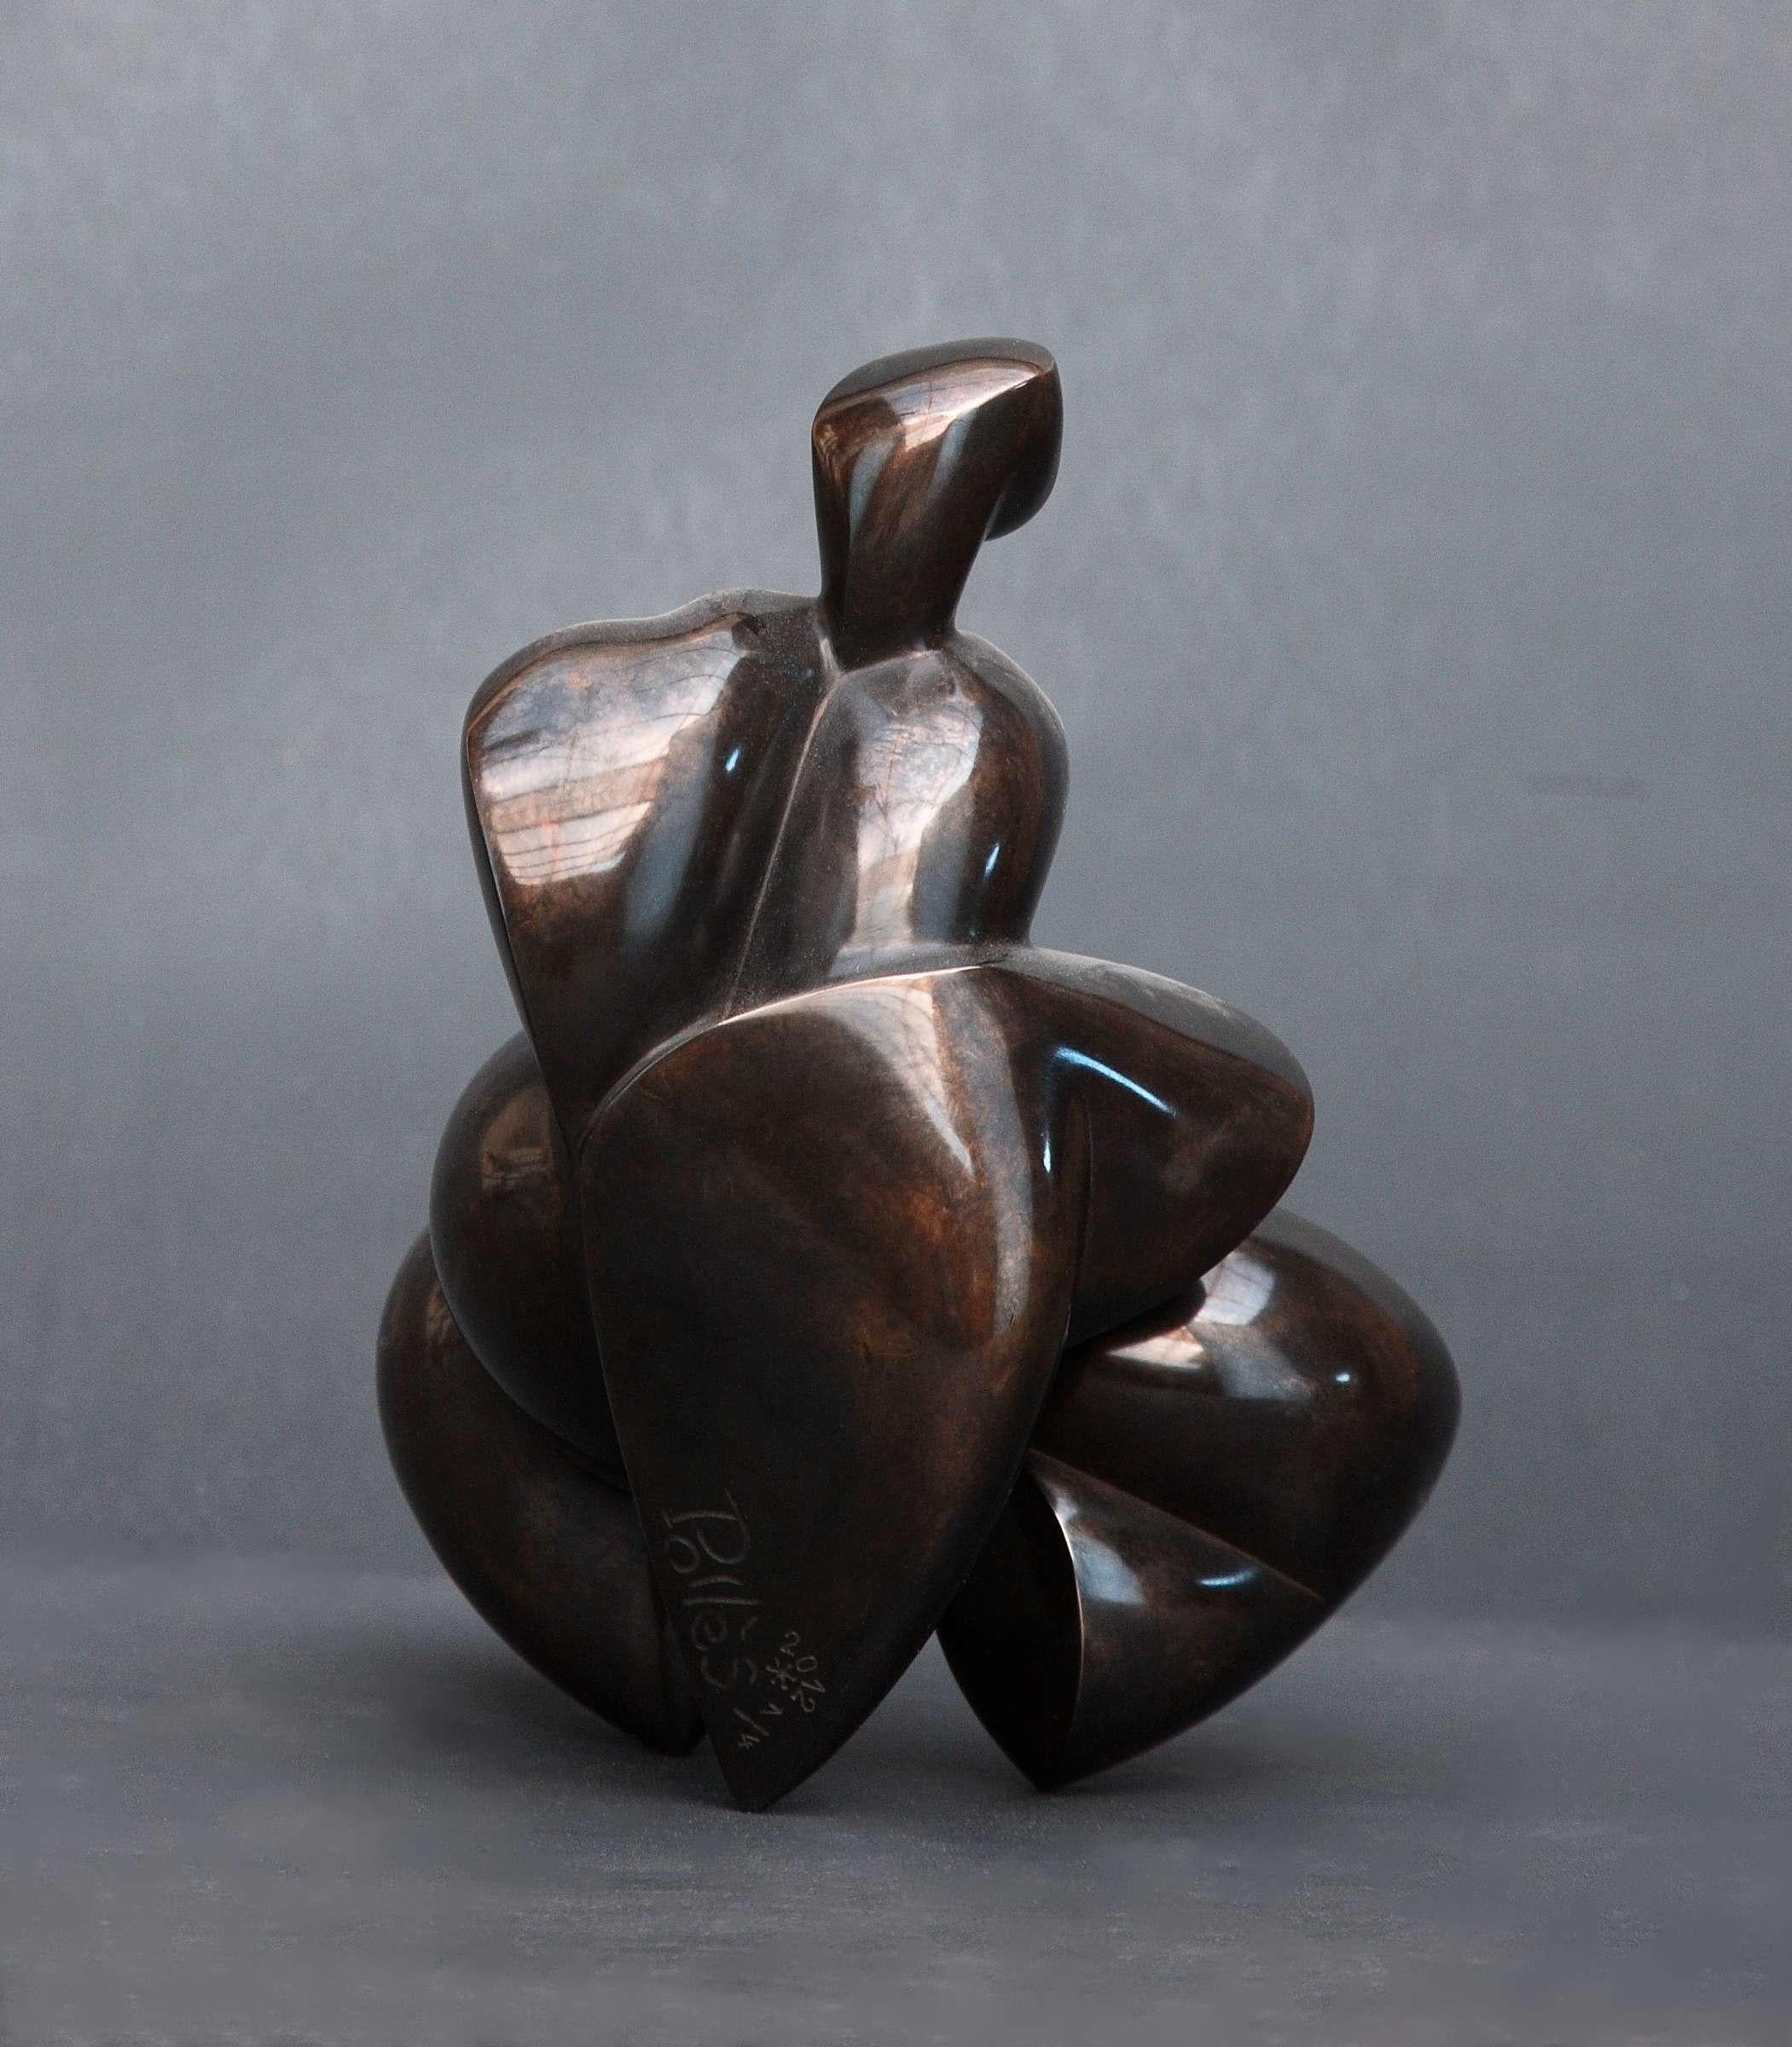 Pollès - Bronze Sculpture - Oxynamide
Bronze
Edition: 1/4
2011
21 x 13 x 17 cm
Signed and Numbered

BIOGRAPHY
Pollès was born in Paris in 1945
Like Leonard de Vinci in an anatomical search of perfection, of representation of movement,with an almost